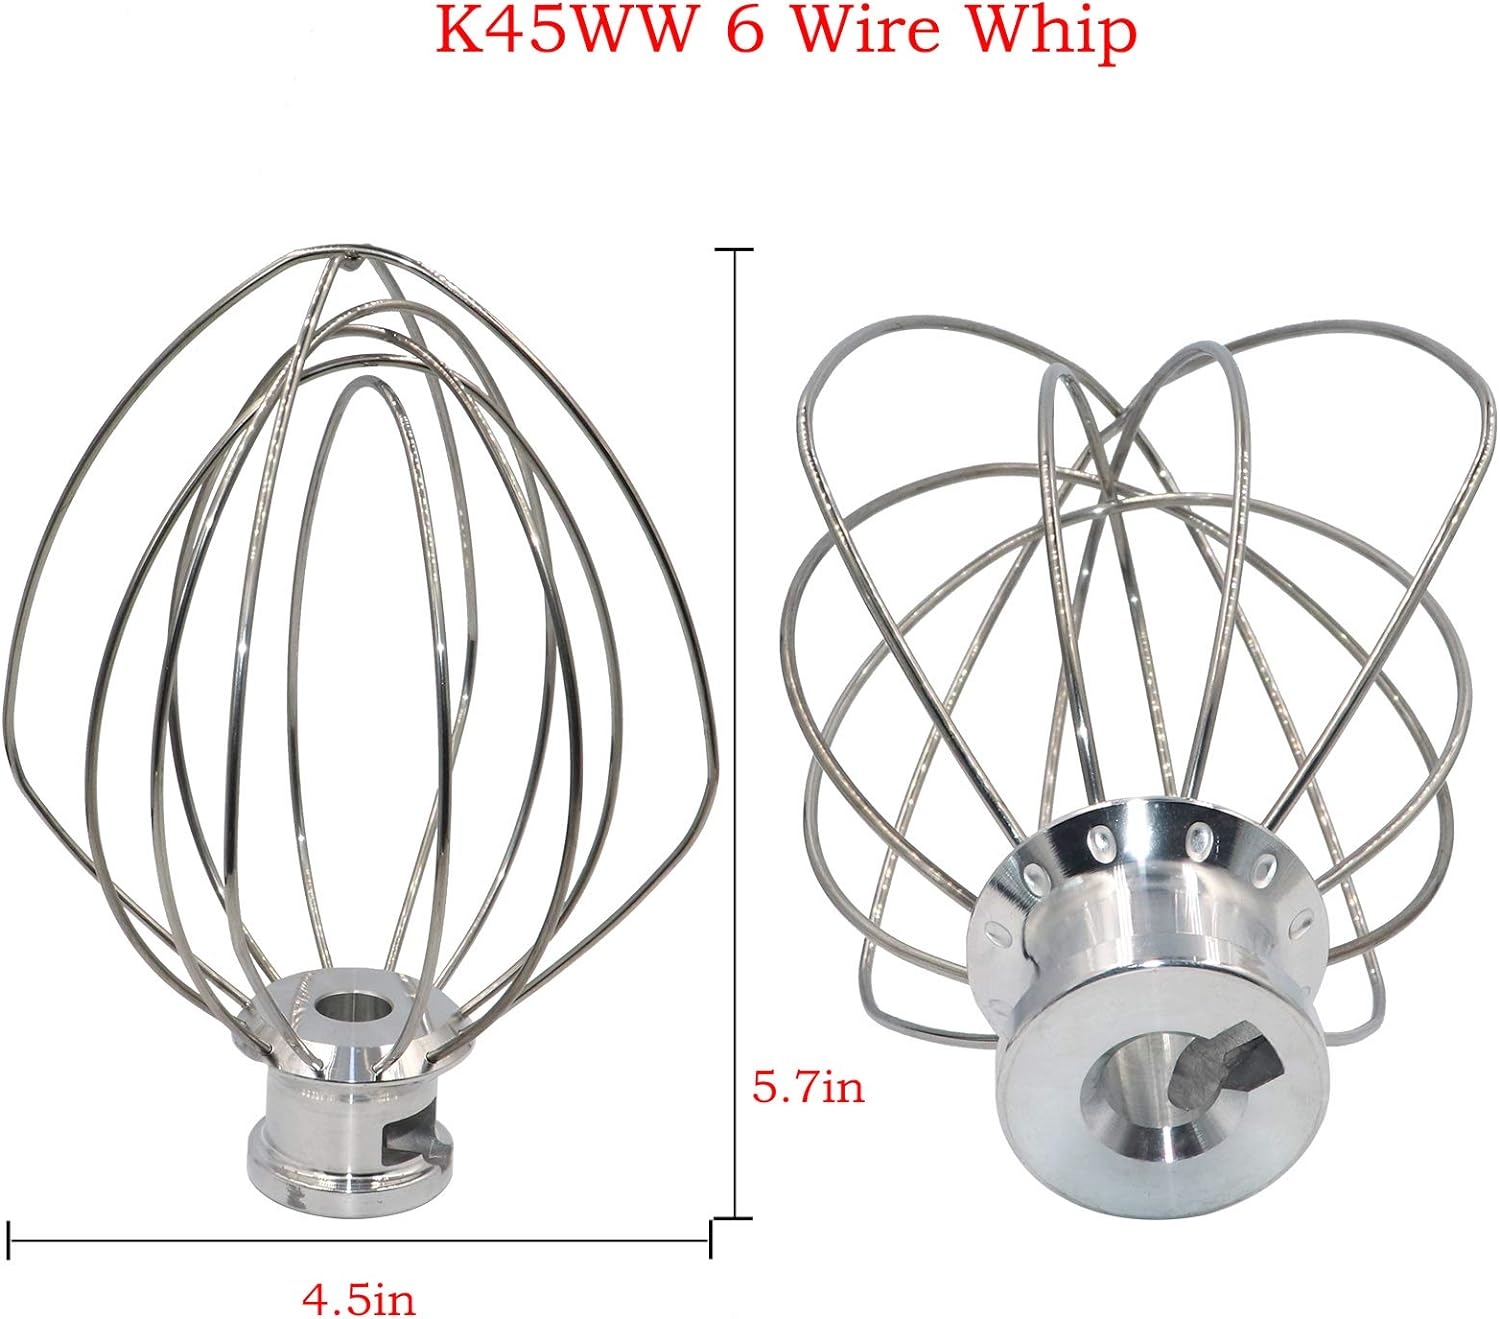 KSM150 Mixer Kit Includes K45WW&K45DH&K45B-K45DH Dough Hook,K45WW Wire Whip and K45B Coated Flat Beater, 3 Pieces Stand Mixers Repair Set Compatible with Kenmore, Roper, Replace